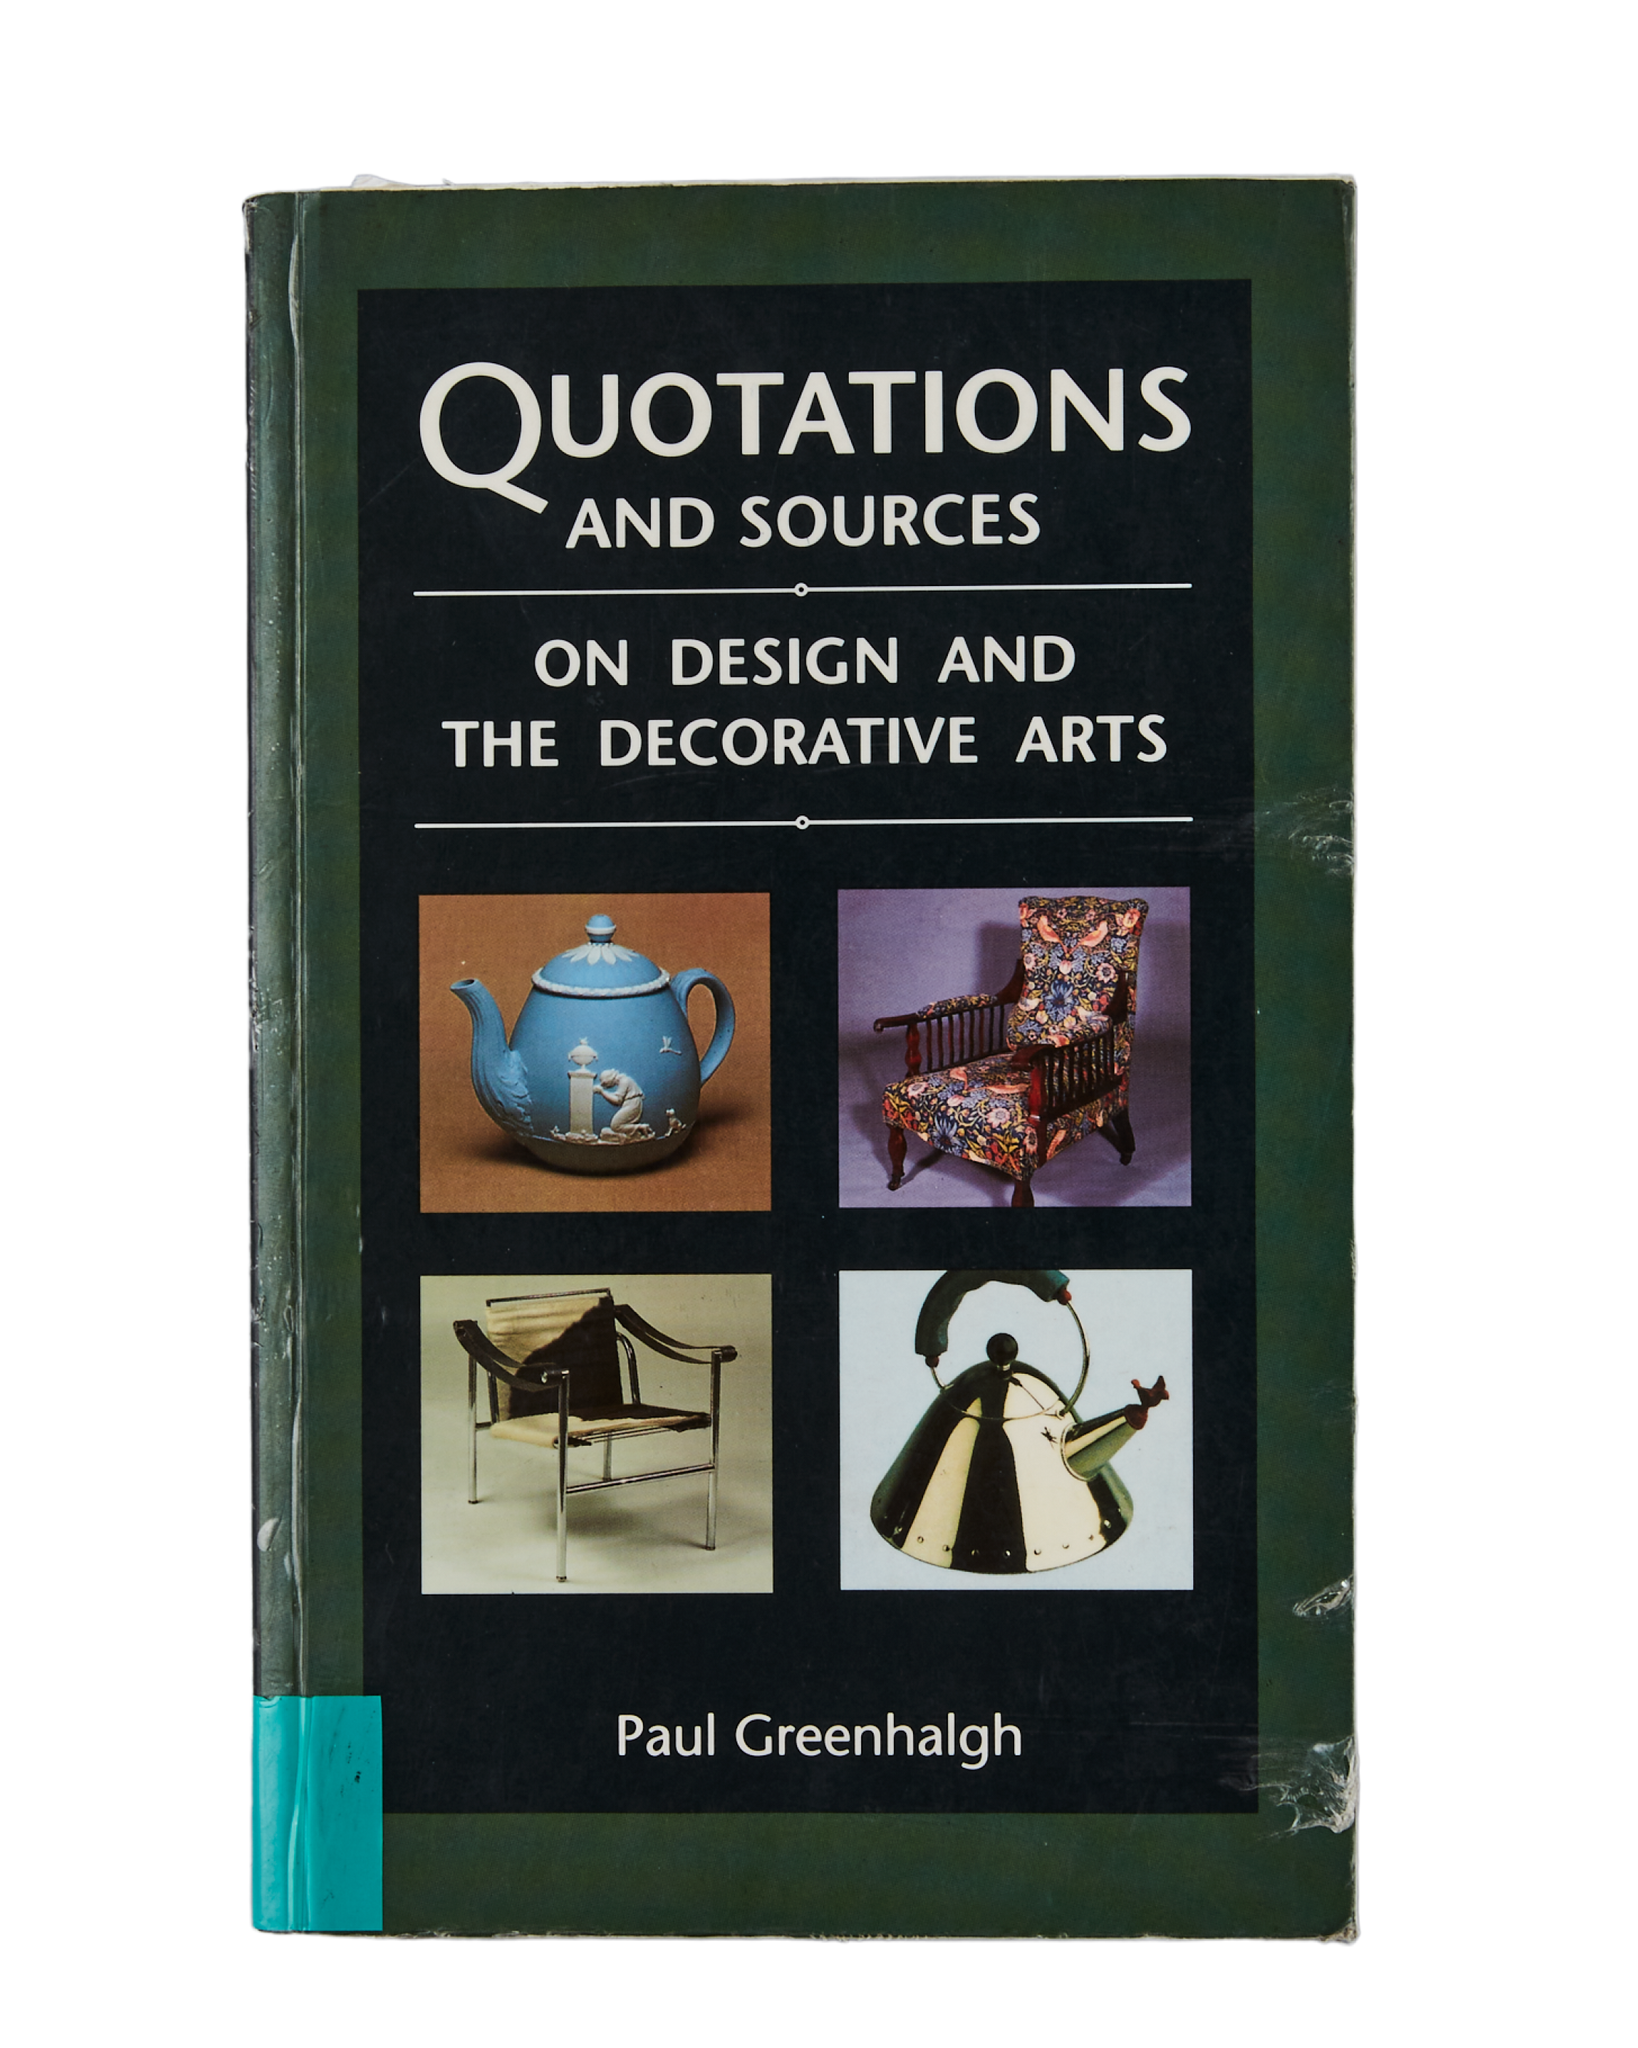 Quotations and Sources on Design and the Decorative Arts